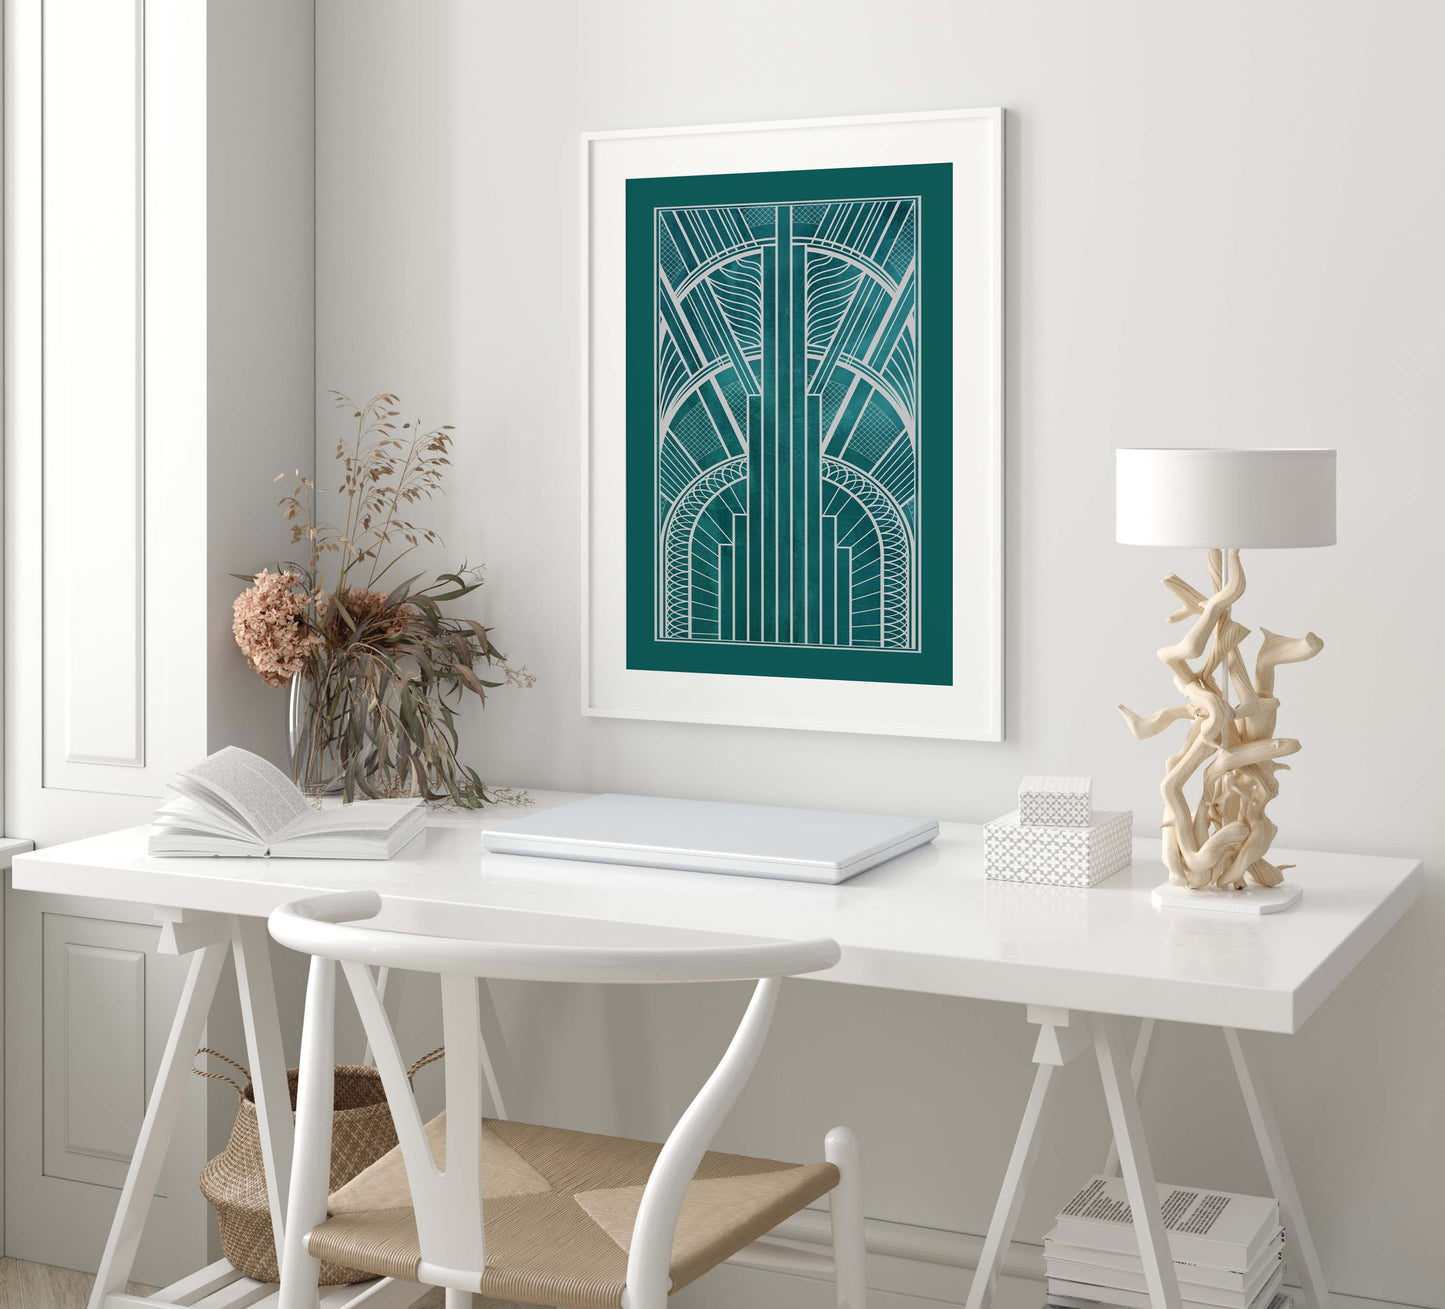 Teal art deco poster with silver detail